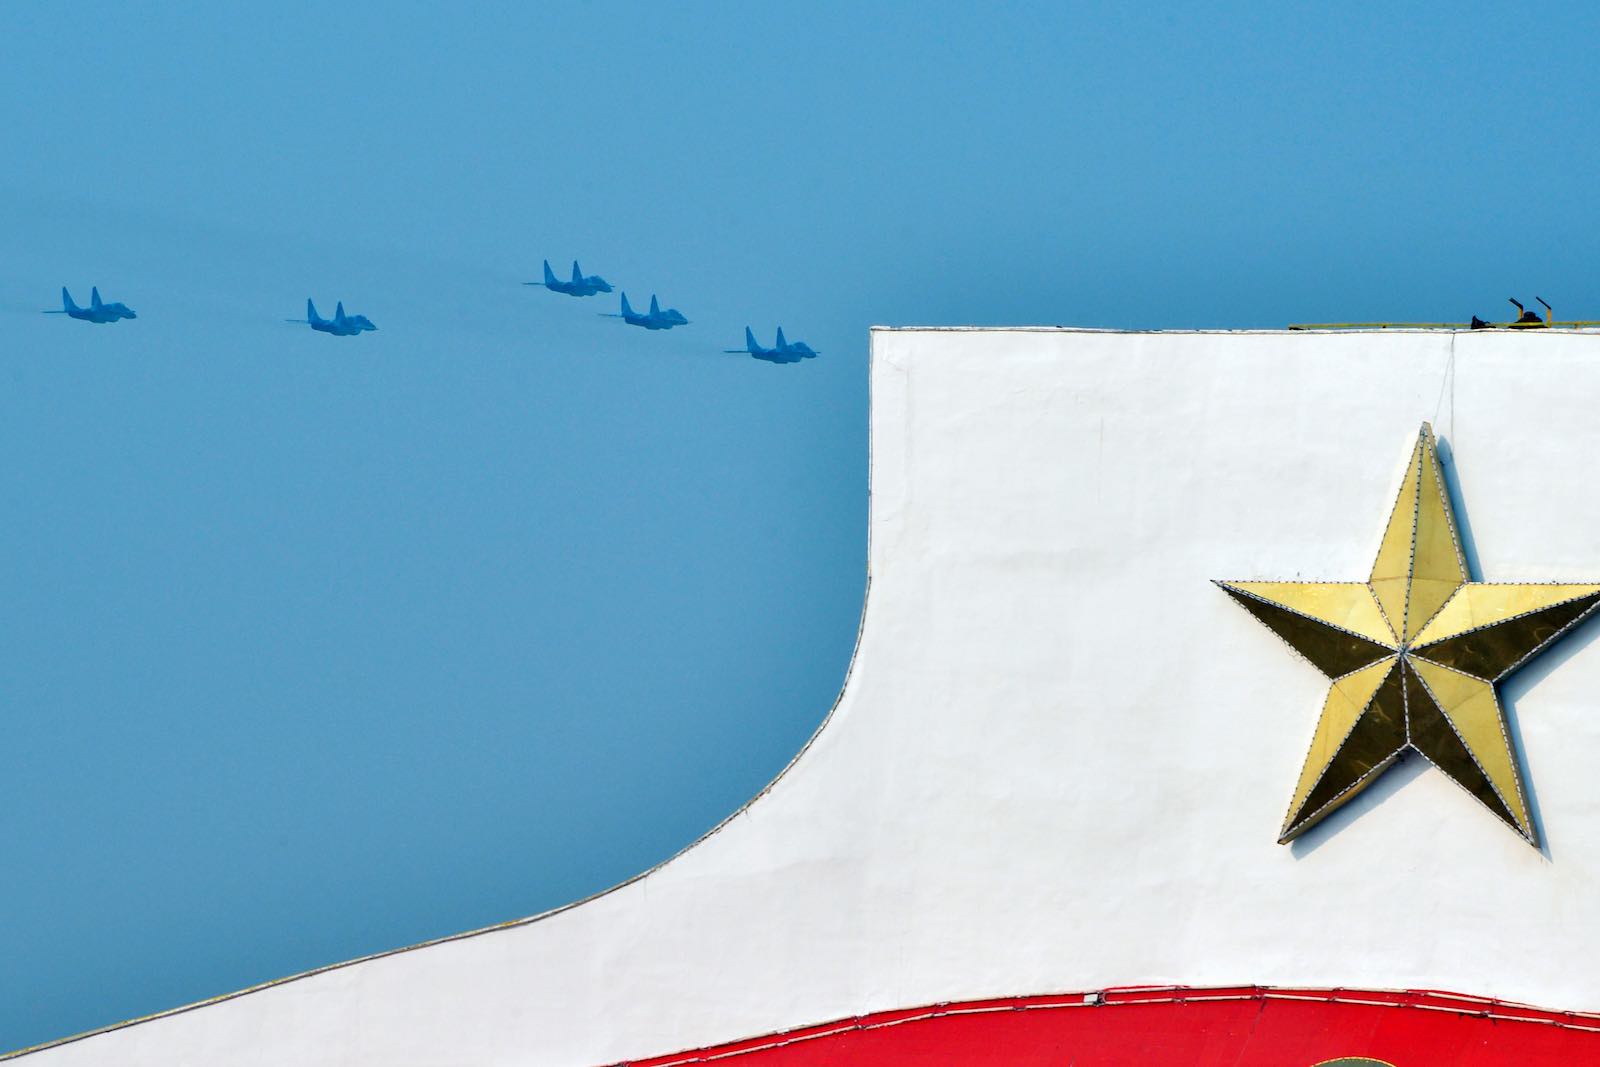 Myanmar's fighter jets marking 74th Armed Forces Day in Naypyidaw on 27 March (Photo: Thet Aung via Getty)